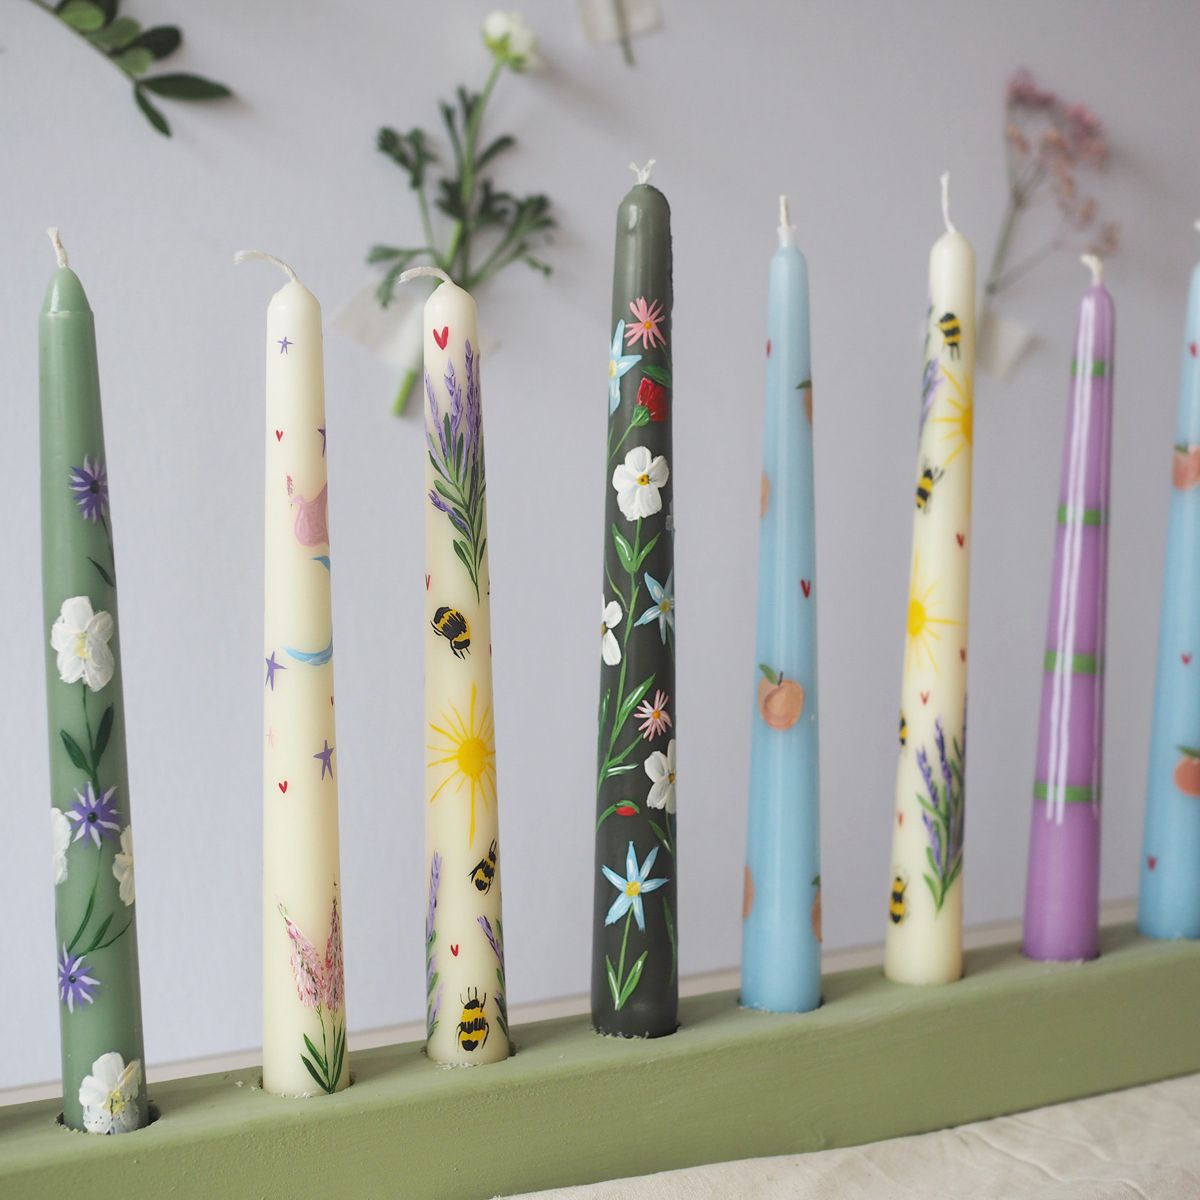 How To Paint Candles